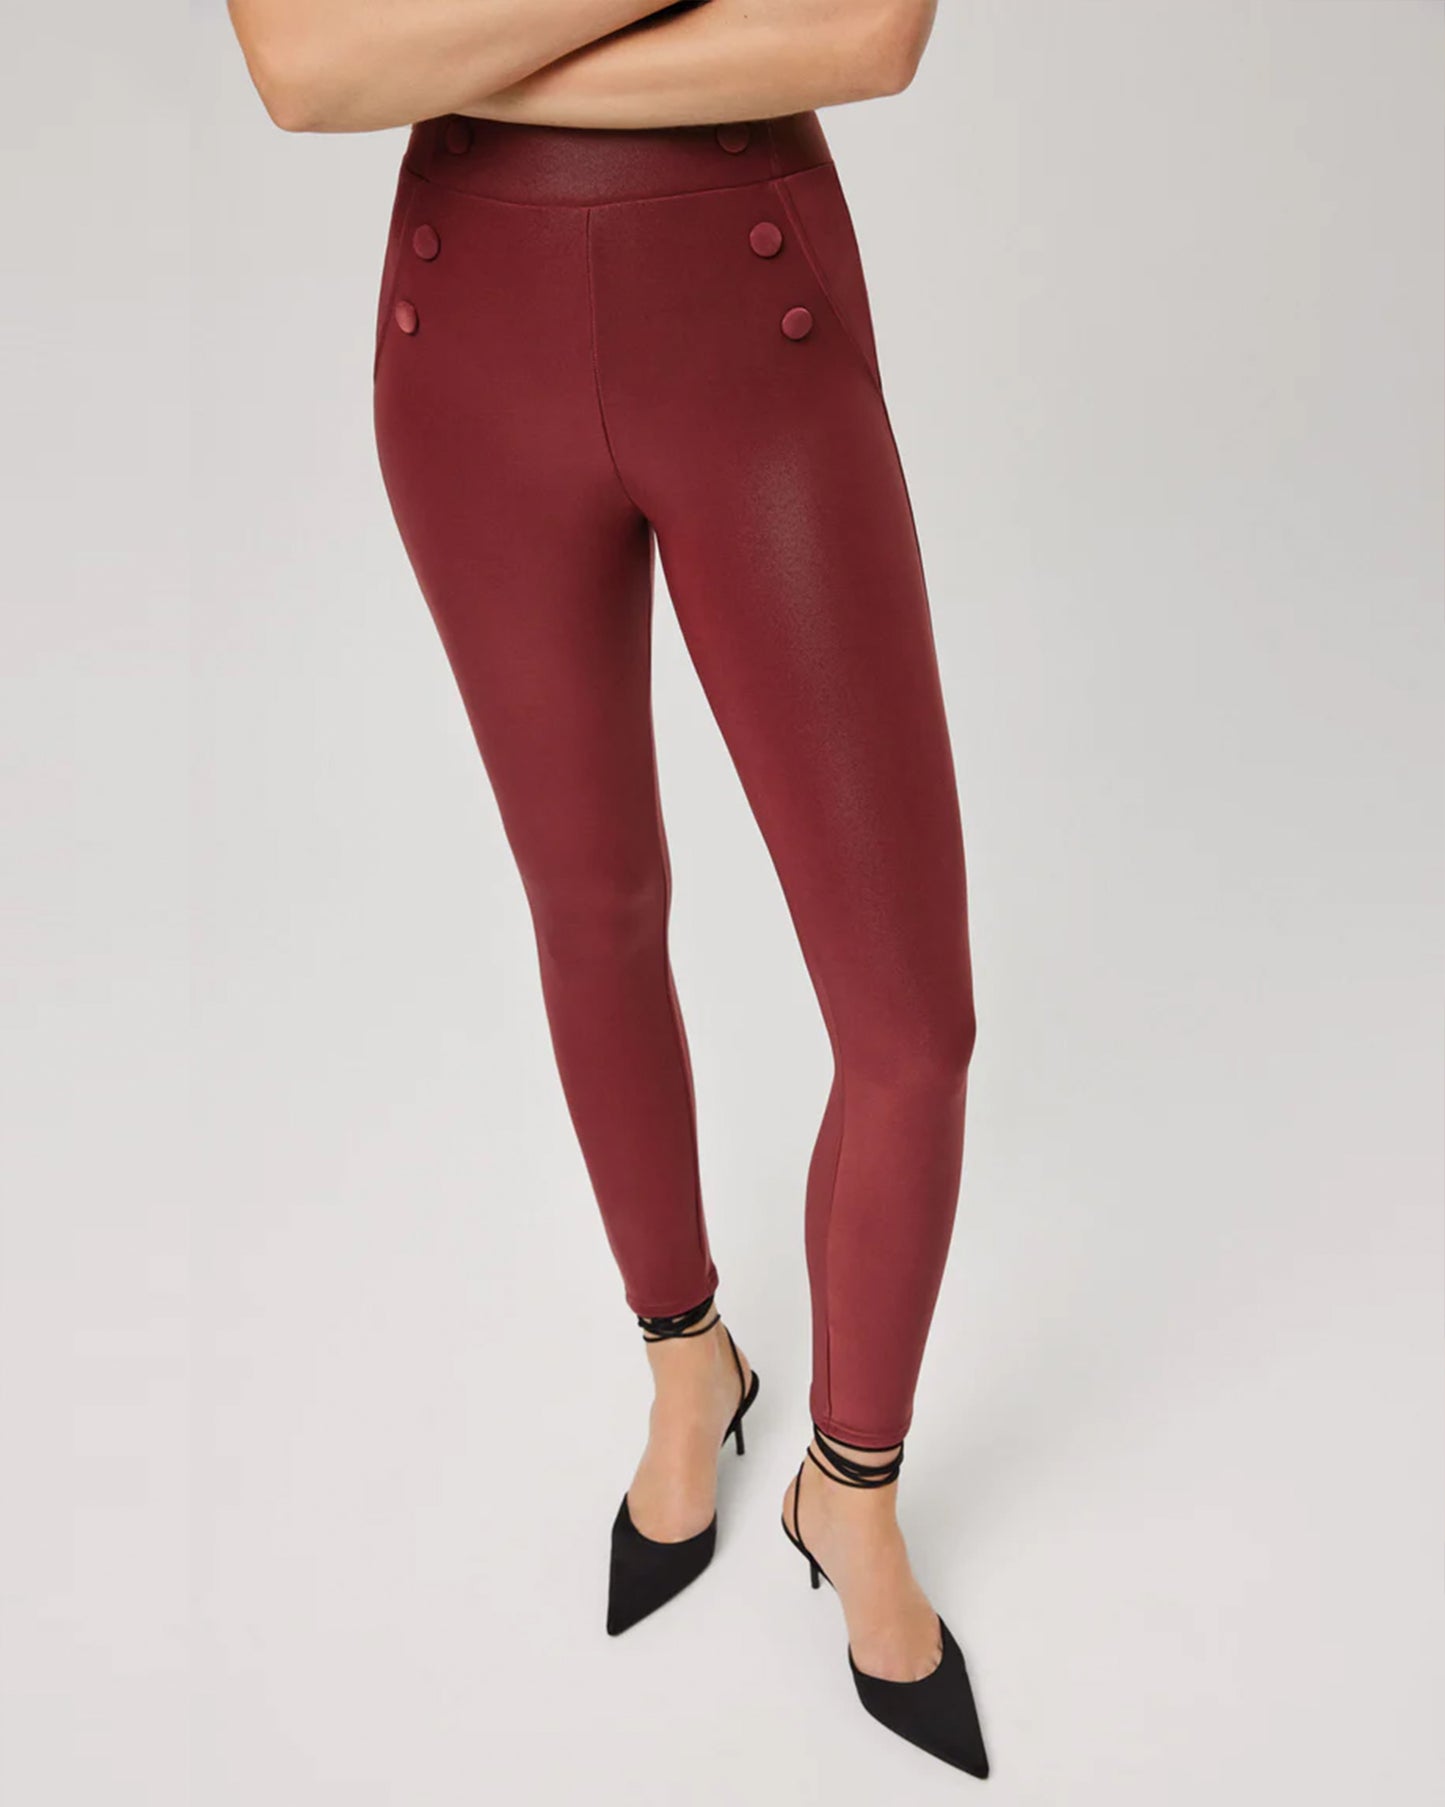 Ysabel Mora 70166 Waxed Thermal Leggings - High rise wine / maroon trouser leggings with waxed effect finish, warm fleece lining, faux front pockets with covered buttons and deep elasticated waistband.